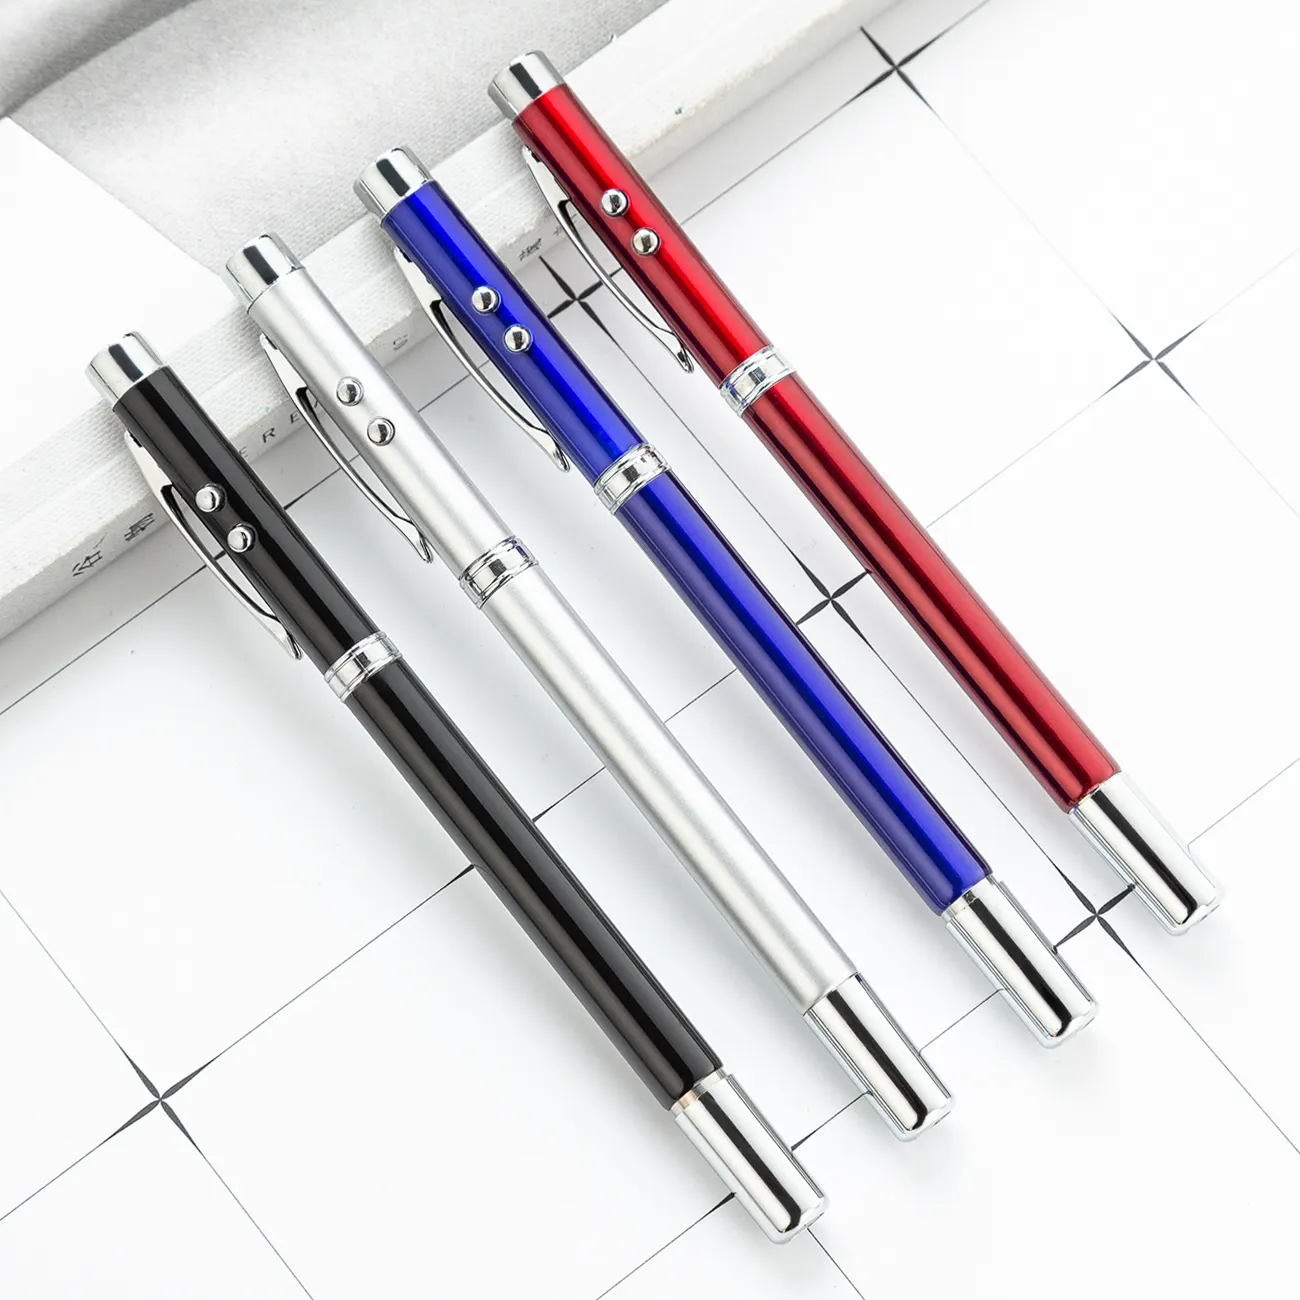 5 in 1 Red Laser Pointer Retractable Telescopic Antenna Teaching Pointer Magnet Pen LED Flashlight Ball Pen with Metal Case